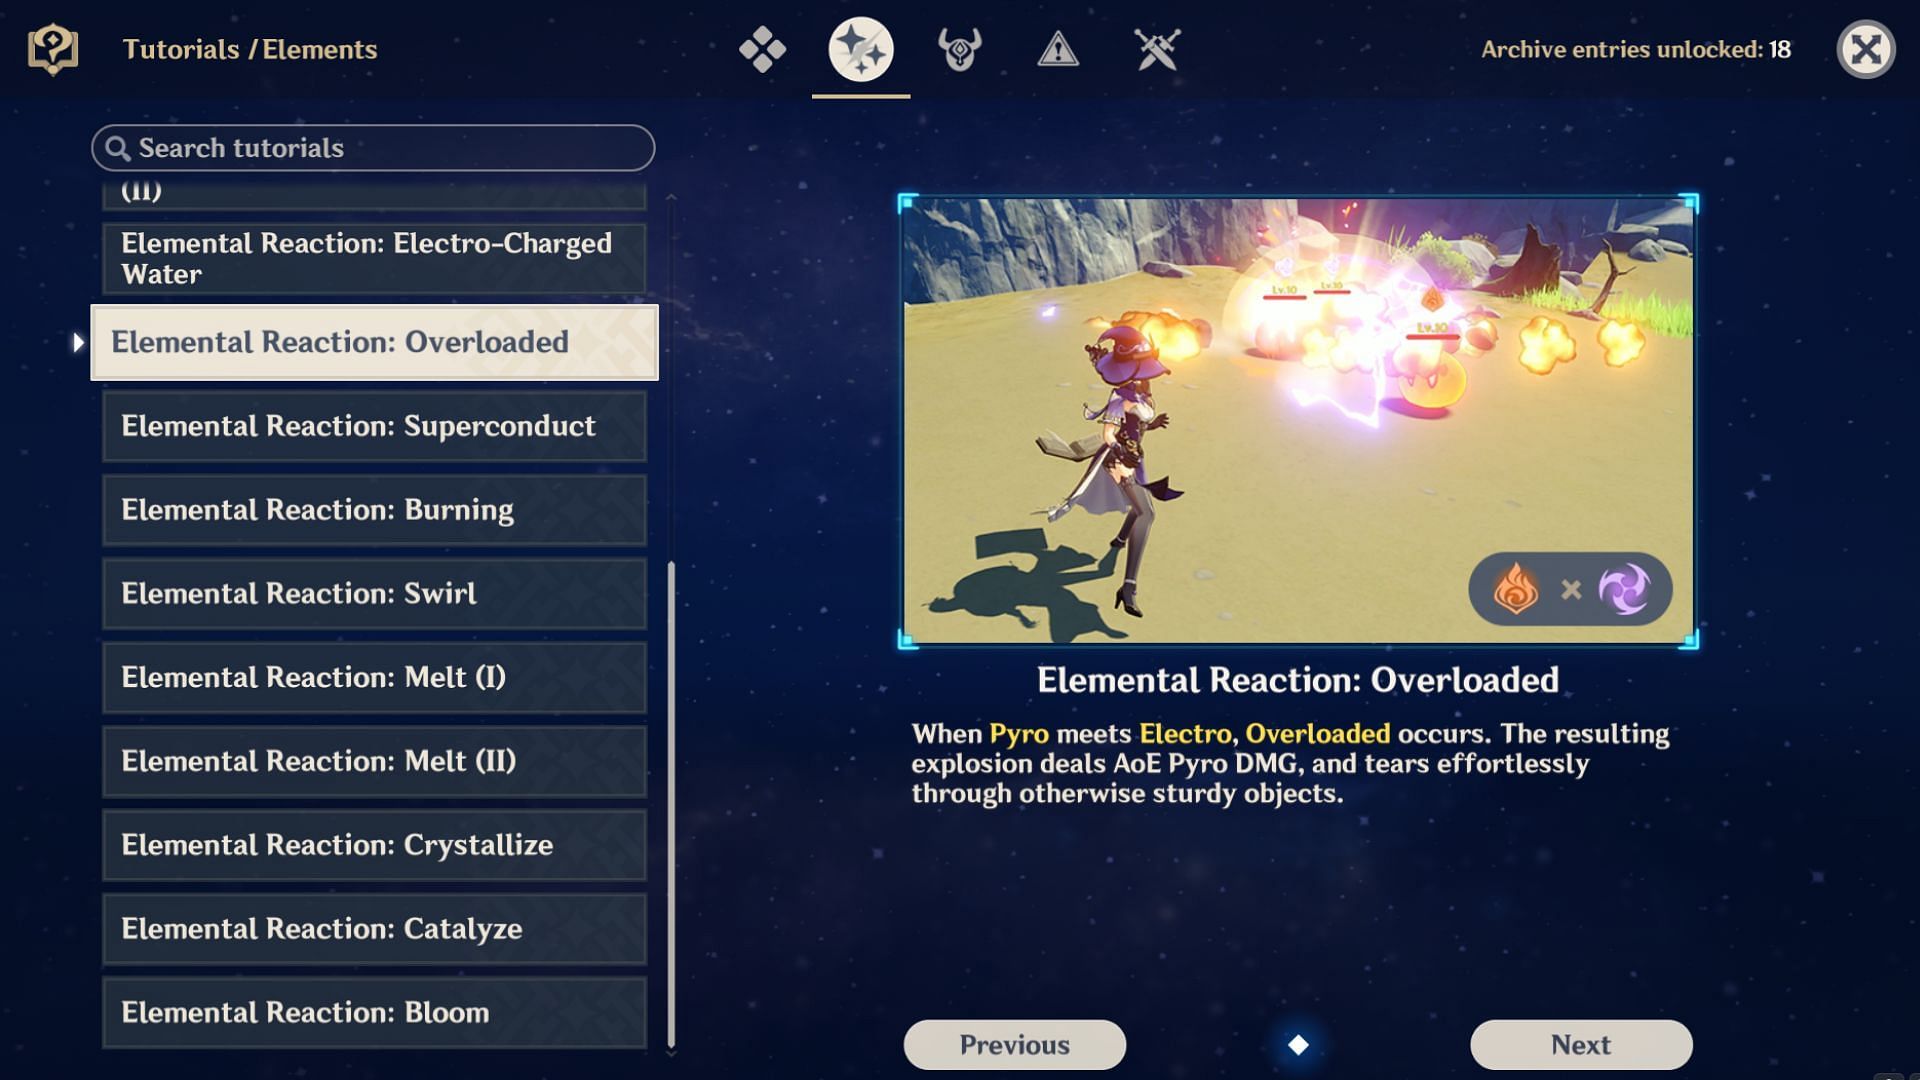 In-game tutorial for Overload reaction (Image via HoYoverse)